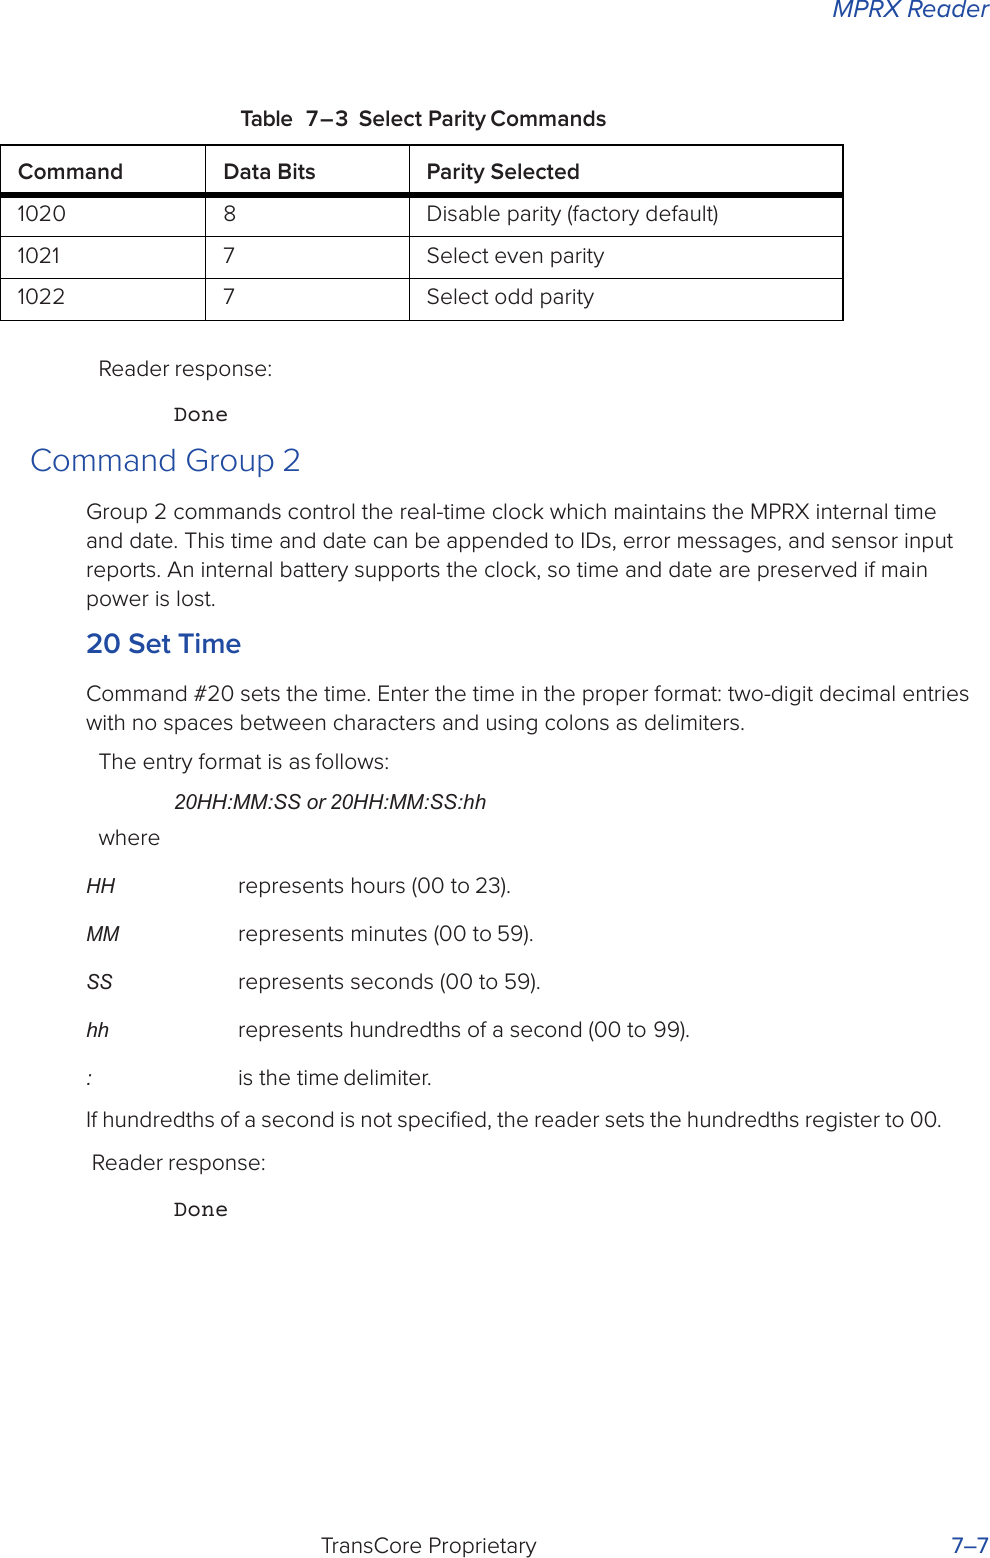 MPRX ReaderTransCore Proprietary 7–7Table 7 – 3 Select Parity CommandsReader response:DoneCommand Group 2Group 2 commands control the real-time clock which maintains the MPRX internal time and date. This time and date can be appended to IDs, error messages, and sensor input reports. An internal battery supports the clock, so time and date are preserved if main power is lost.20 Set TimeCommand #20 sets the time. Enter the time in the proper format: two-digit decimal entries with no spaces between characters and using colons as delimiters.The entry format is as follows:20HH:MM:SS or 20HH:MM:SS:hhwhereHH represents hours (00 to 23).MM represents minutes (00 to 59).SS represents seconds (00 to 59).hh  represents hundredths of a second (00 to 99).: is the time delimiter.If hundredths of a second is not speciﬁed, the reader sets the hundredths register to 00. Reader response:DoneCommand Data Bits Parity Selected1020 8 Disable parity (factory default)1021 7 Select even parity1022 7 Select odd parity